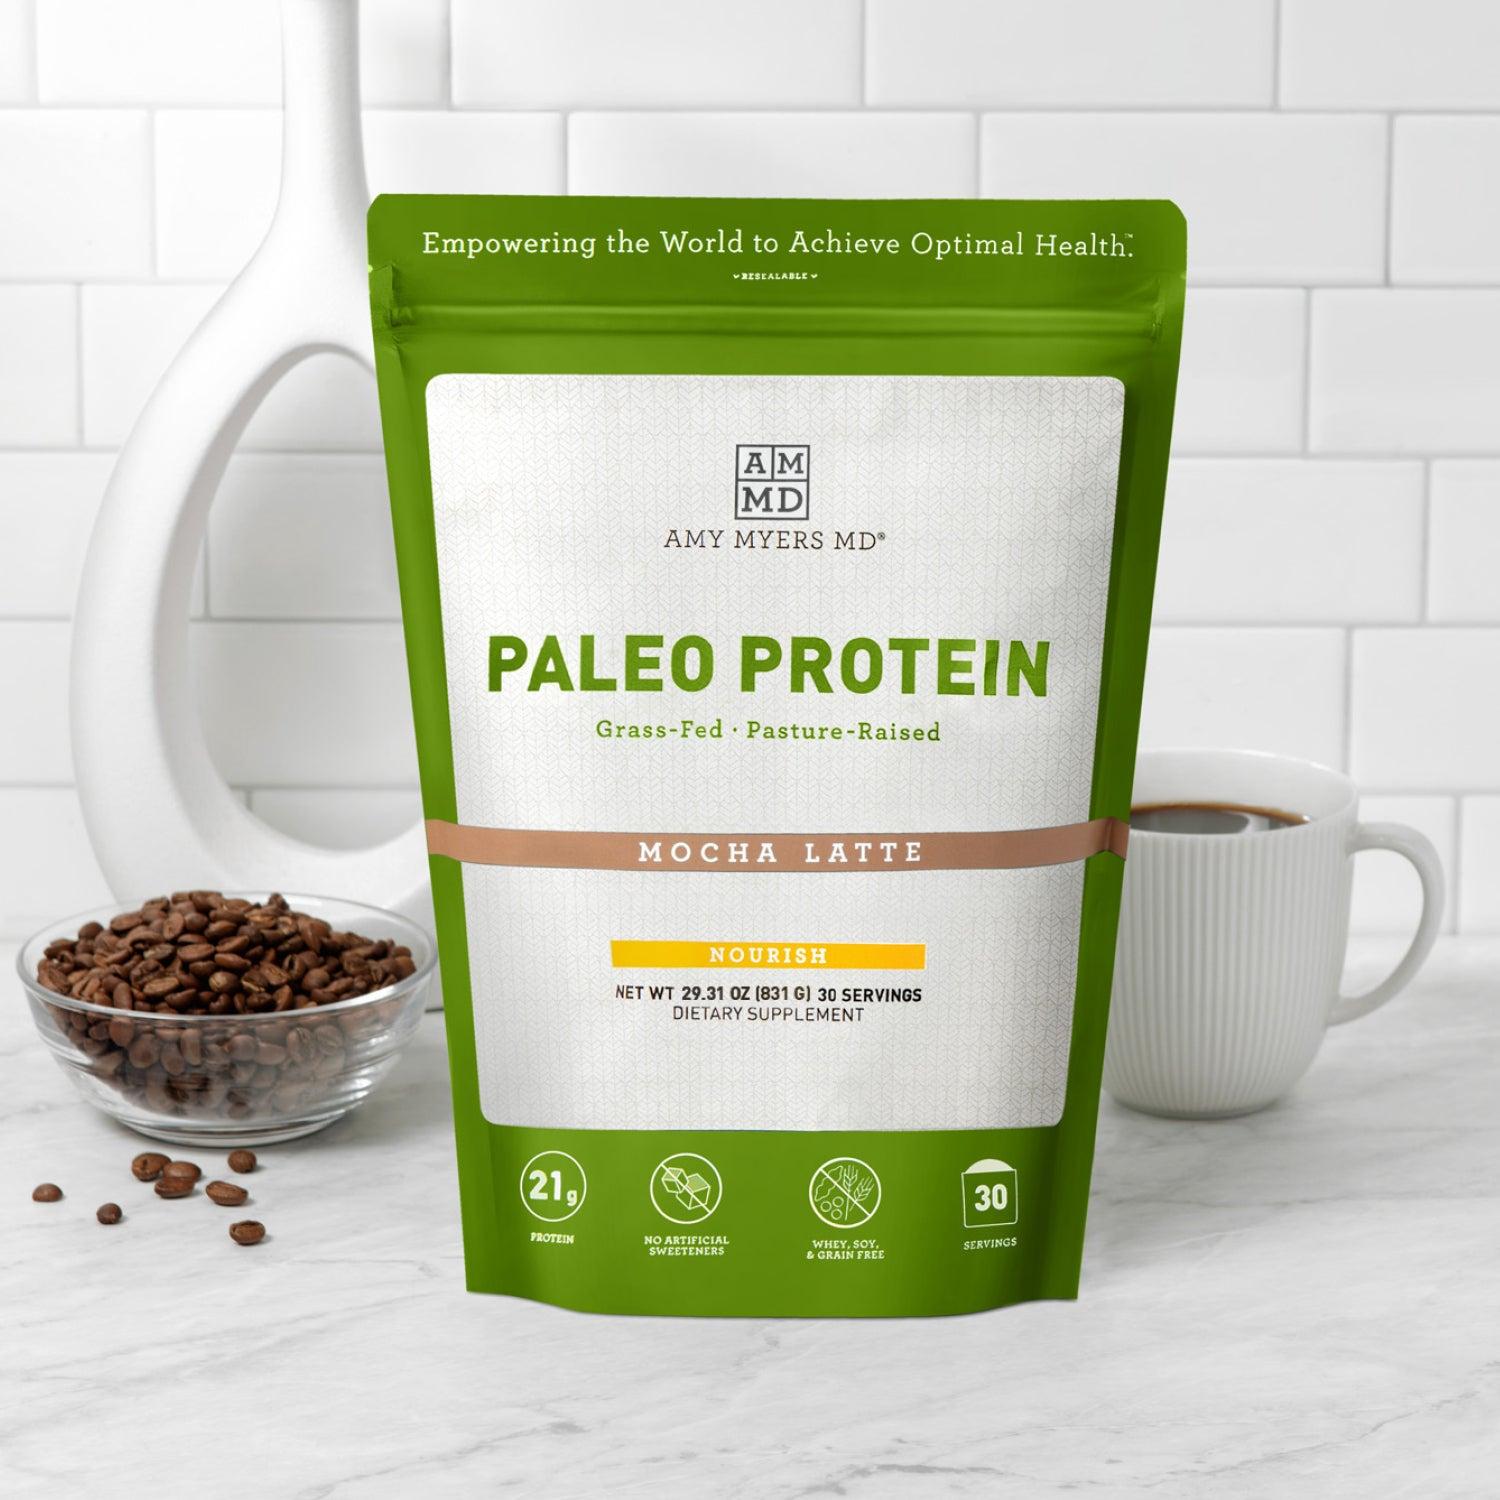 Resealable bag of AMMD Mocha Latte flavored Paleo Protein sitting on a wooden countertop, with white tile background.